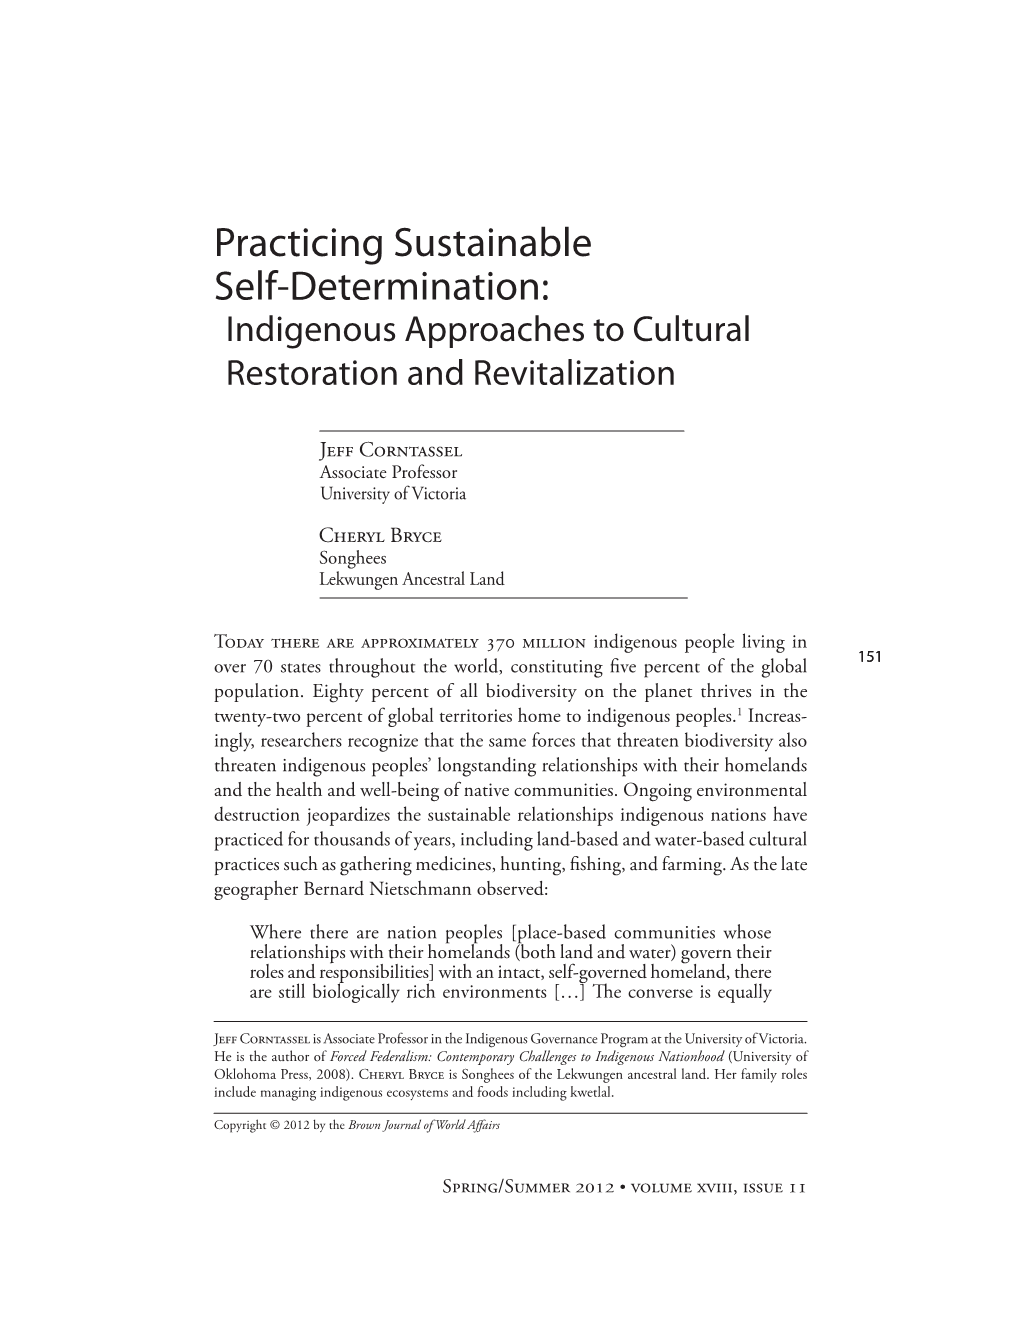 Practicing Sustainable Self-Determination: Indigenous Approaches to Cultural Restoration and Revitalization